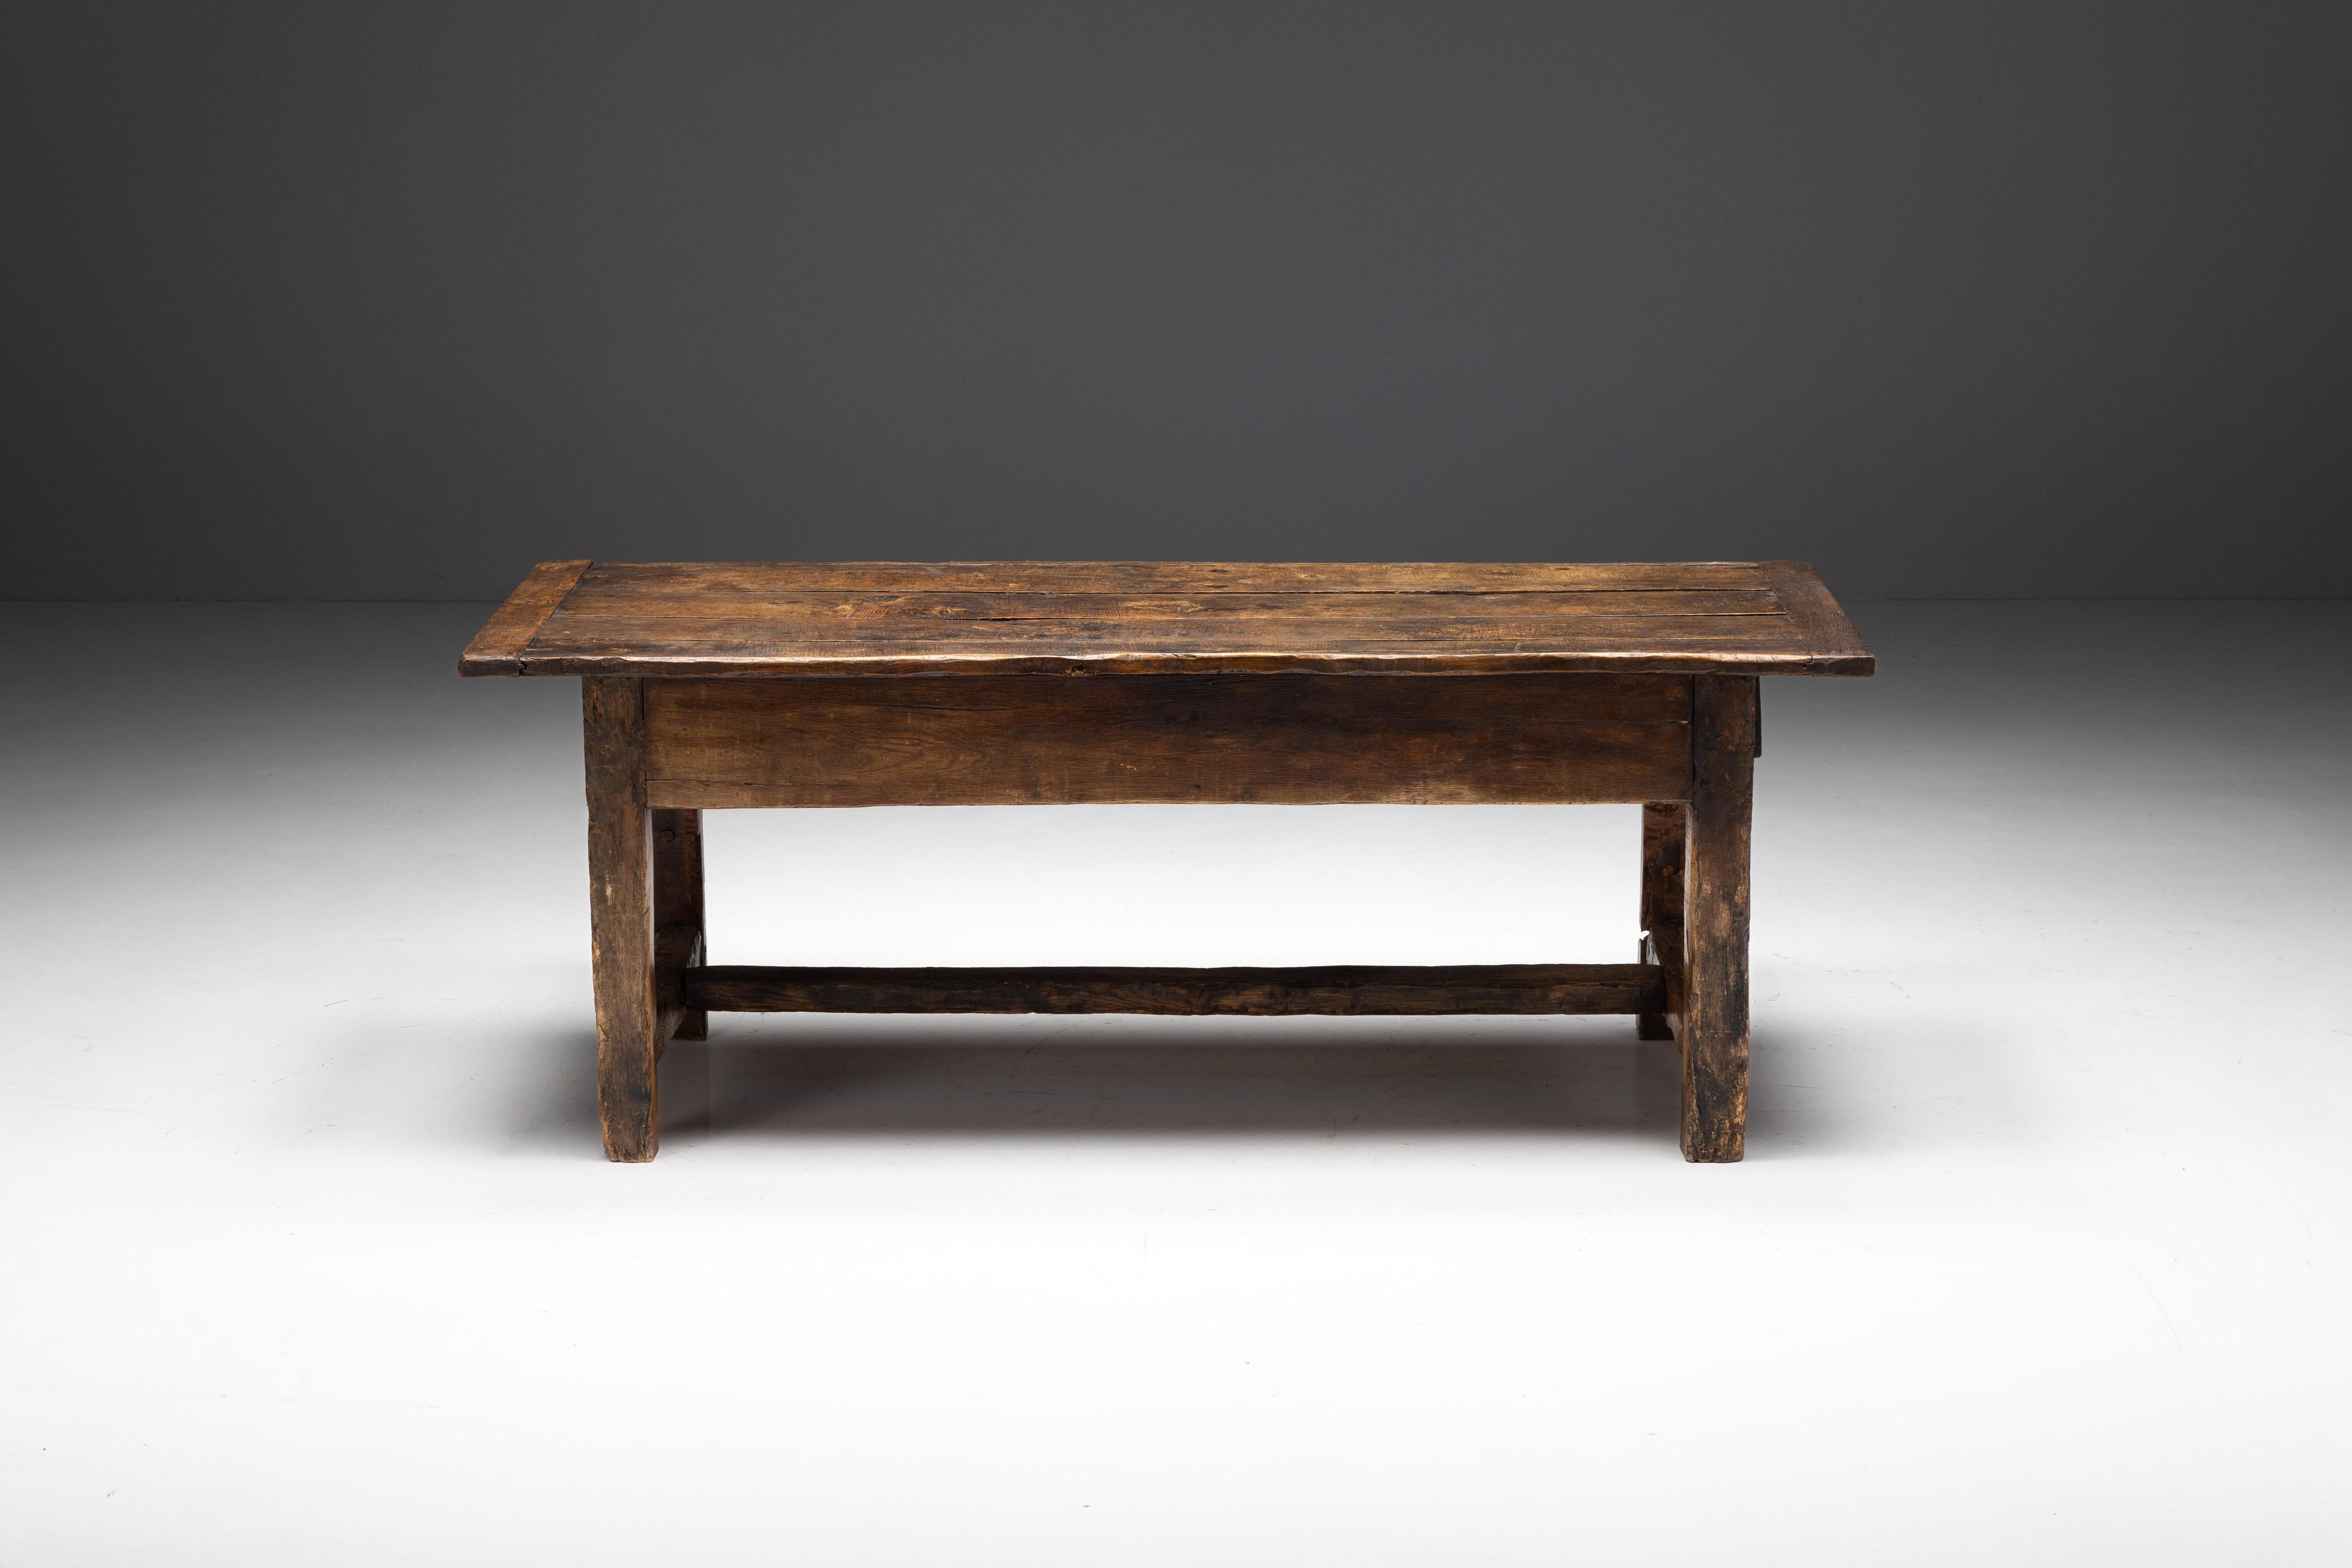 Originally from 19th-century France, this farmhouse table has an endearing natural patina that enriches its rustic charm. The convenience of a drawer adds to its functionality and provides generous storage space for necessities. A symbol of French